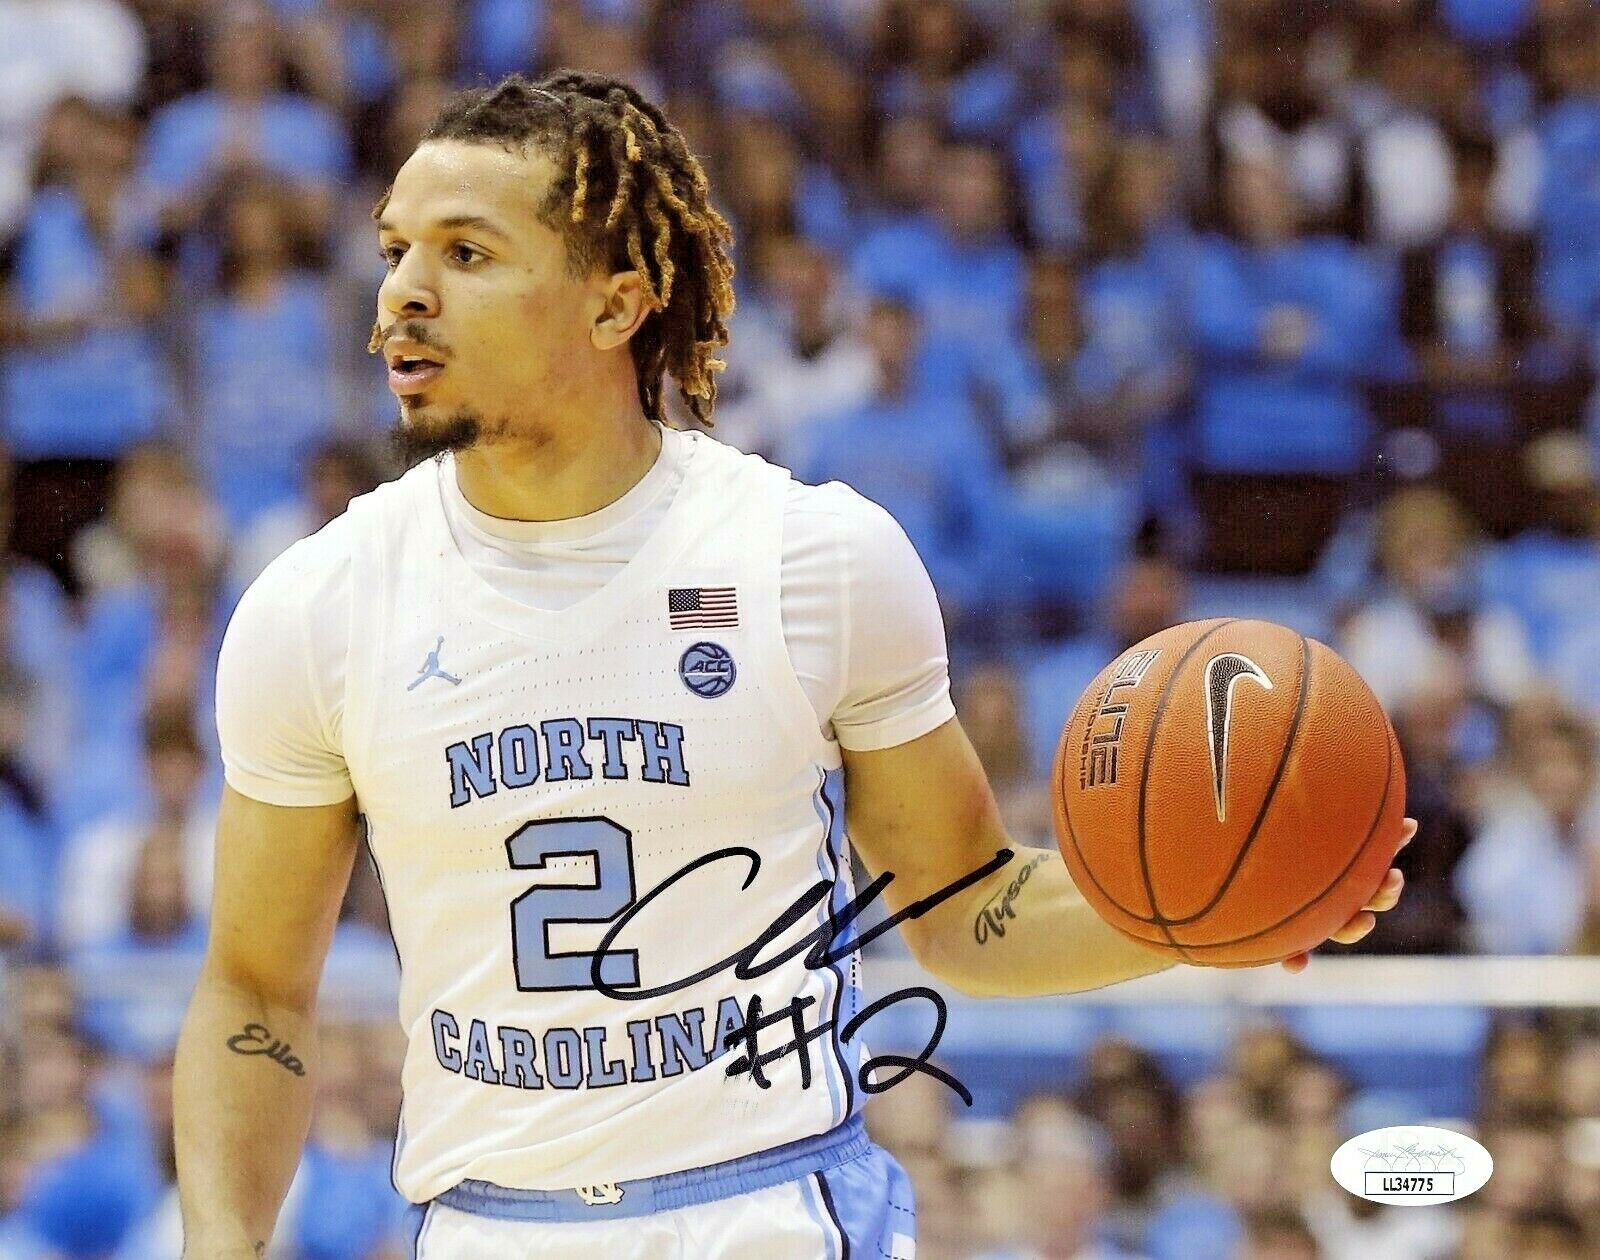 COLE ANTHONY HAND SIGNED AUTOGRAPHED 8X10 BASKETBALL Photo Poster painting WITH JSA COA 1 RARE